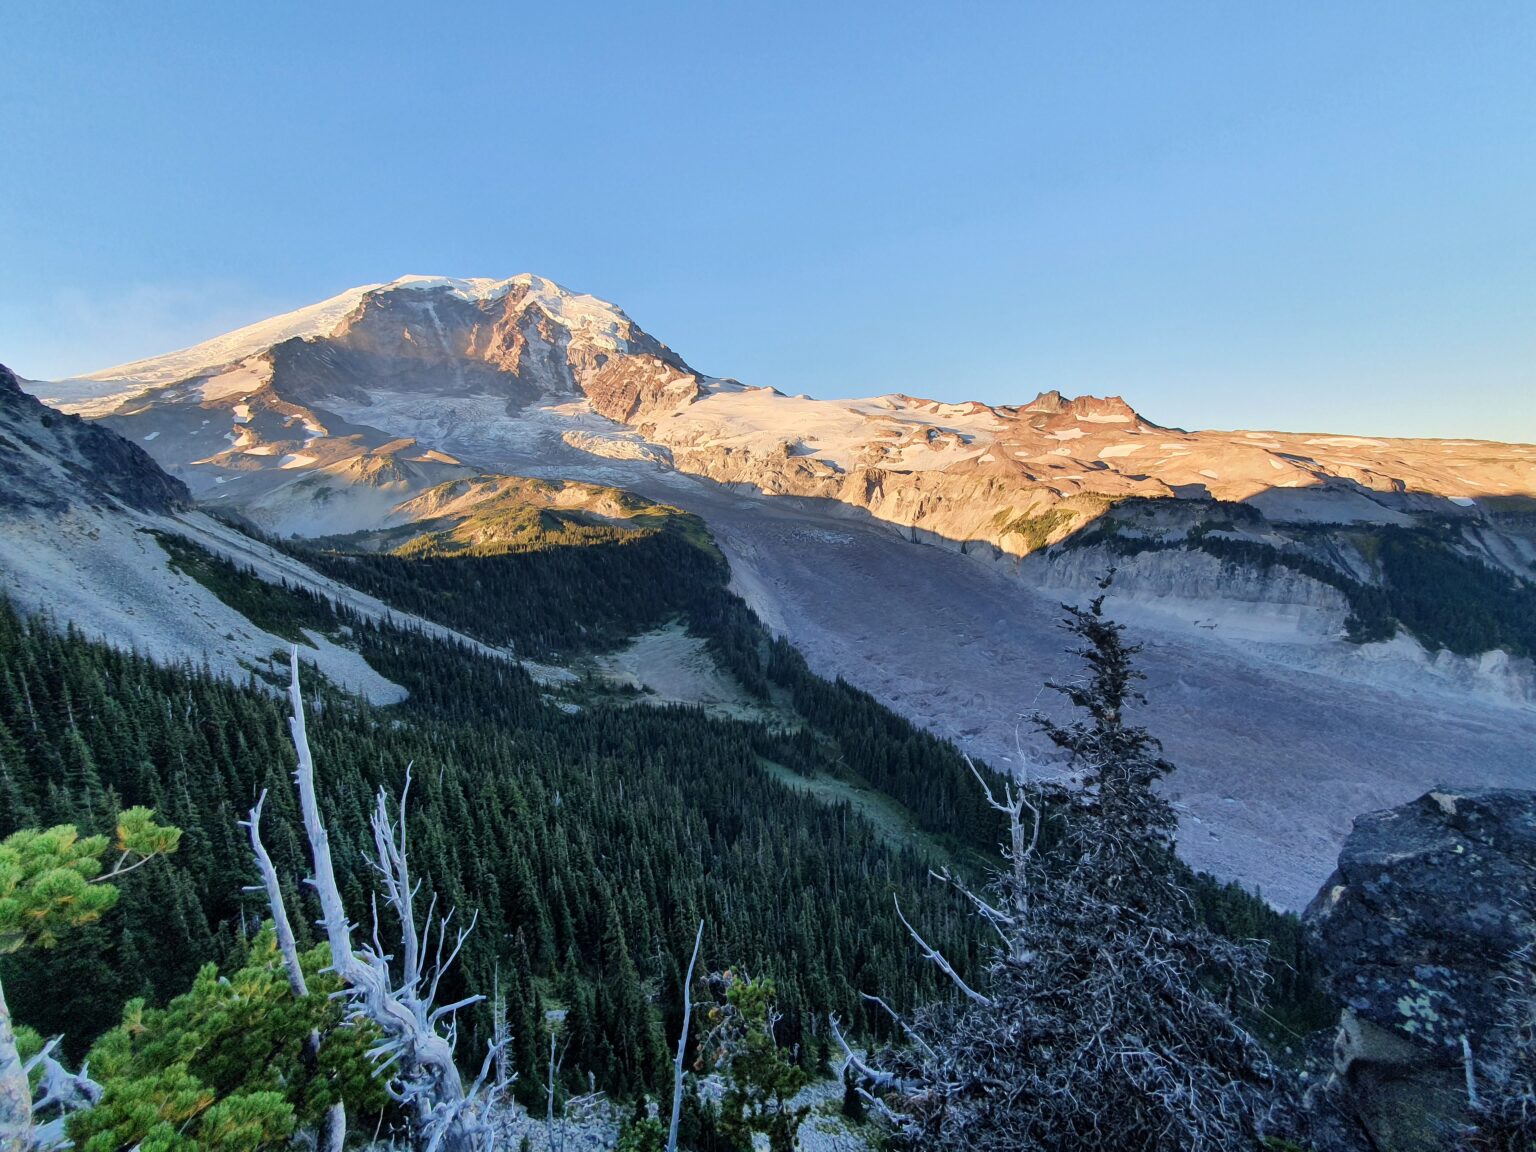 The best view of Mount Rainier from our Northern Loop Variation